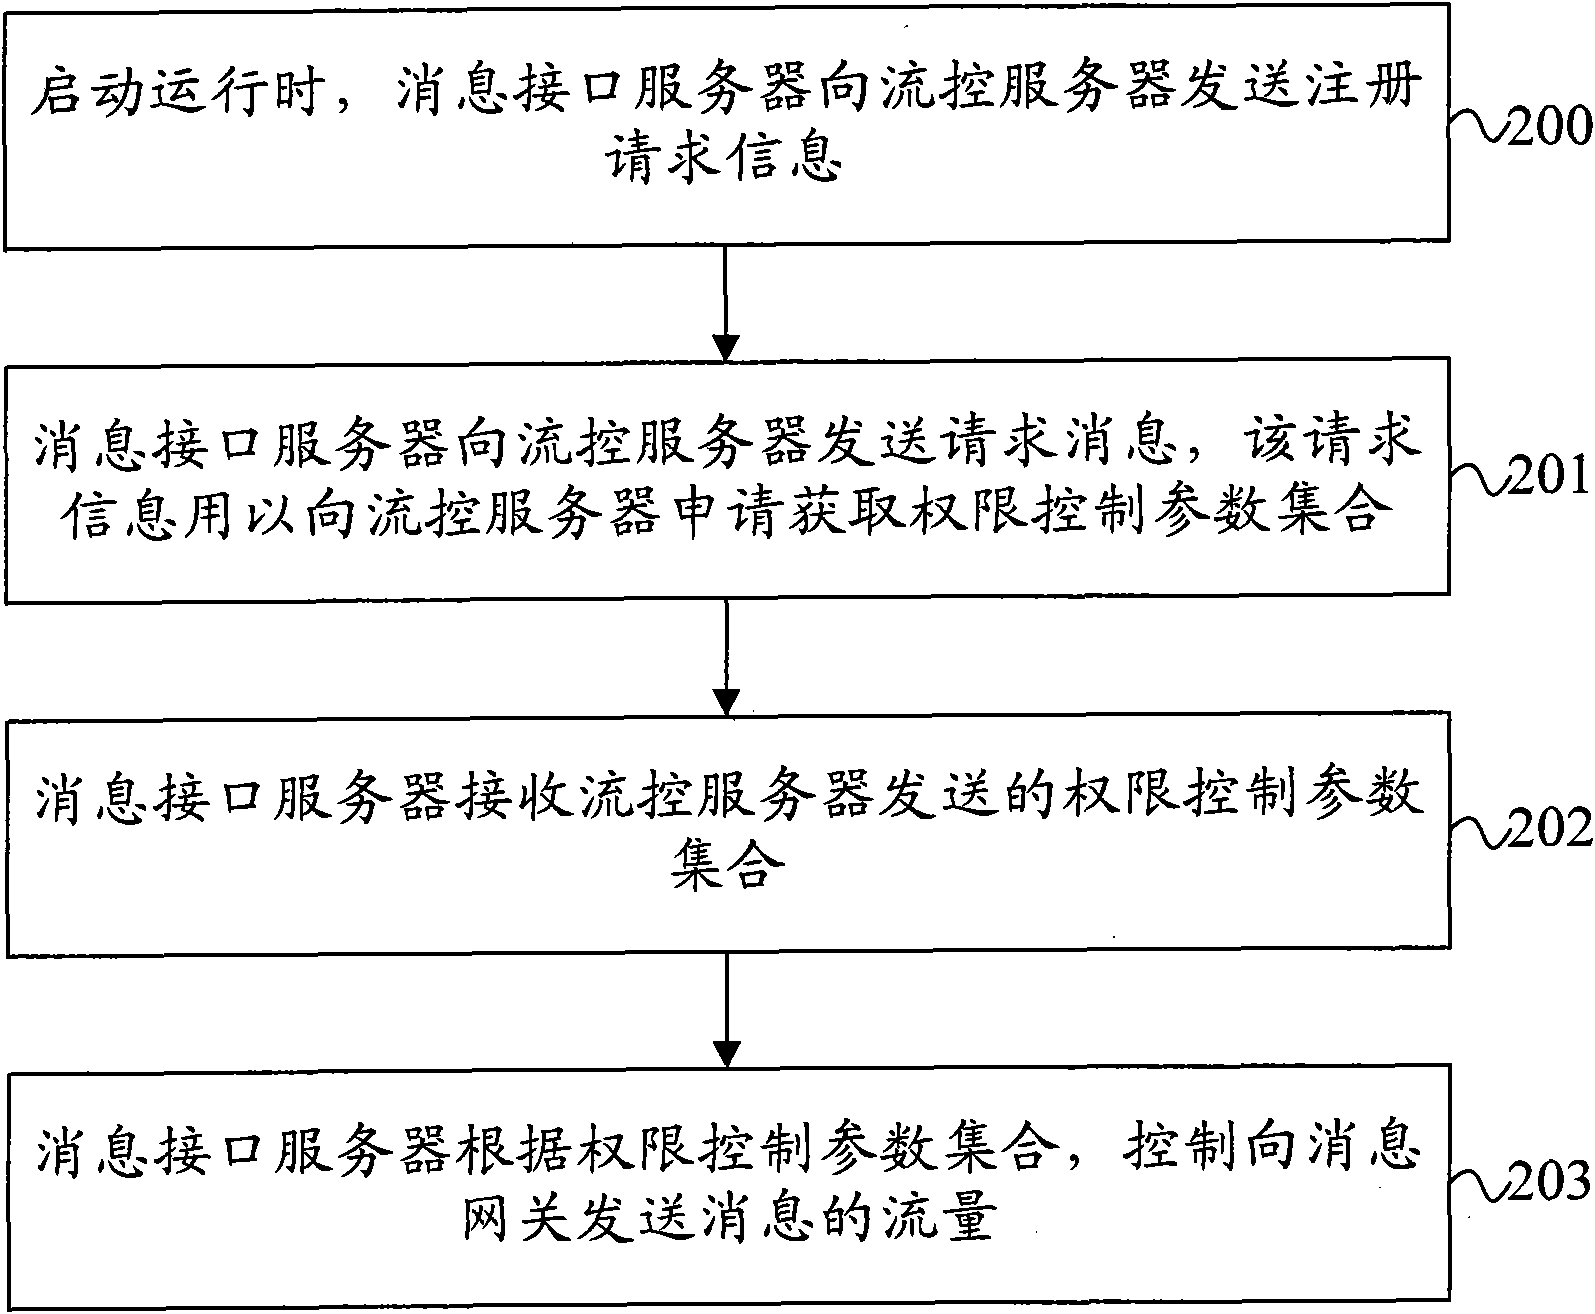 Message traffic control method, equipment and system